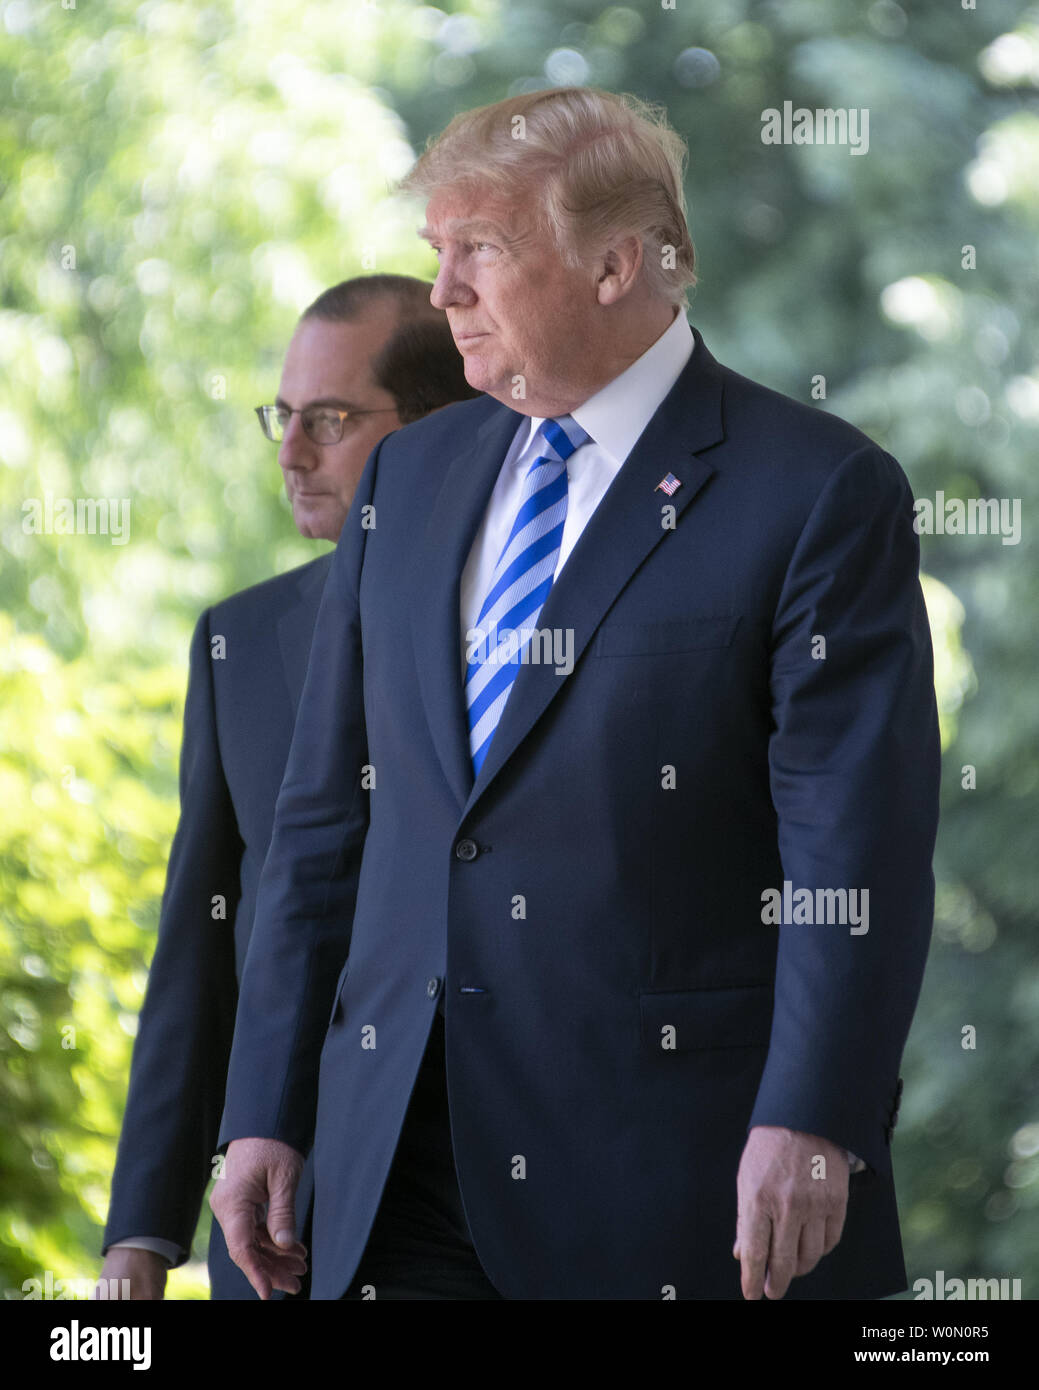 United States President Donald J. Trump and US Secretary of Health and Human Services Alex Azar walk on the Colonnade to the Rose Garden where the President will announce a 'new blueprint' for lowering prescription drug prices in the Rose Garden of the White House in Washington, D.C. on May 11, 2018. Photo by Ron Sachs/UPI Stock Photo